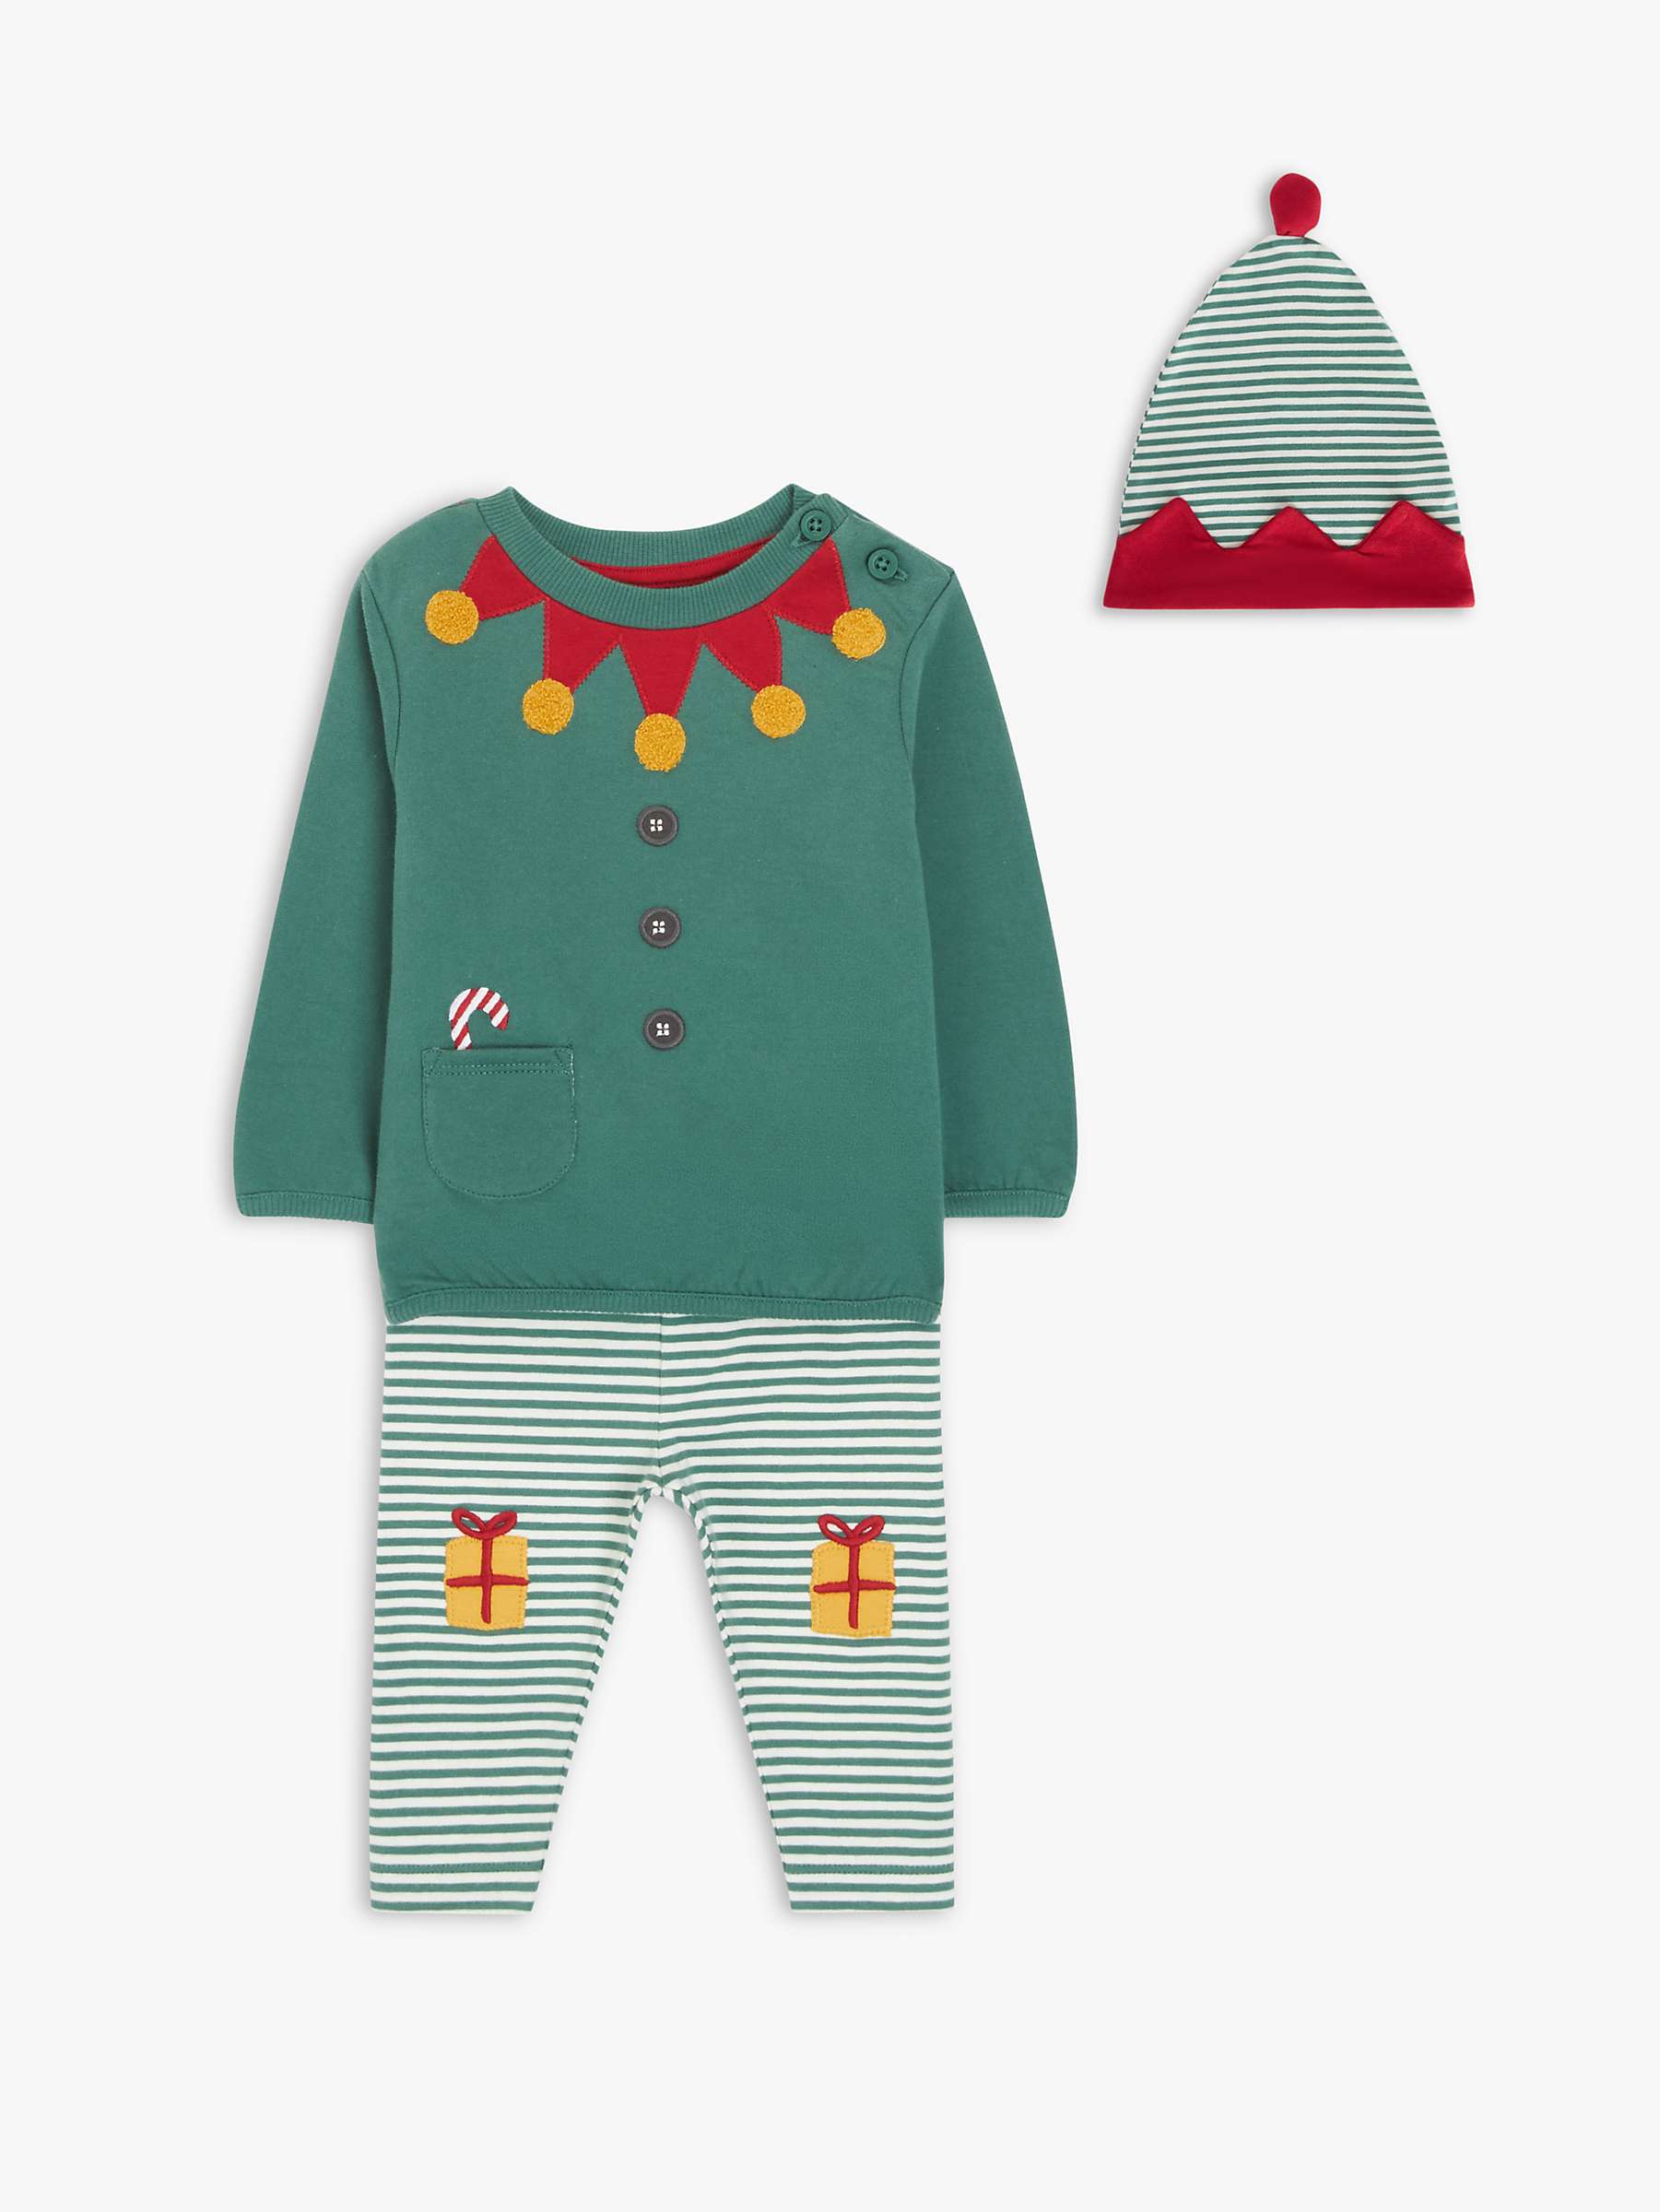 Buy John Lewis Baby Christmas Elf Outfit, Green Online at johnlewis.com